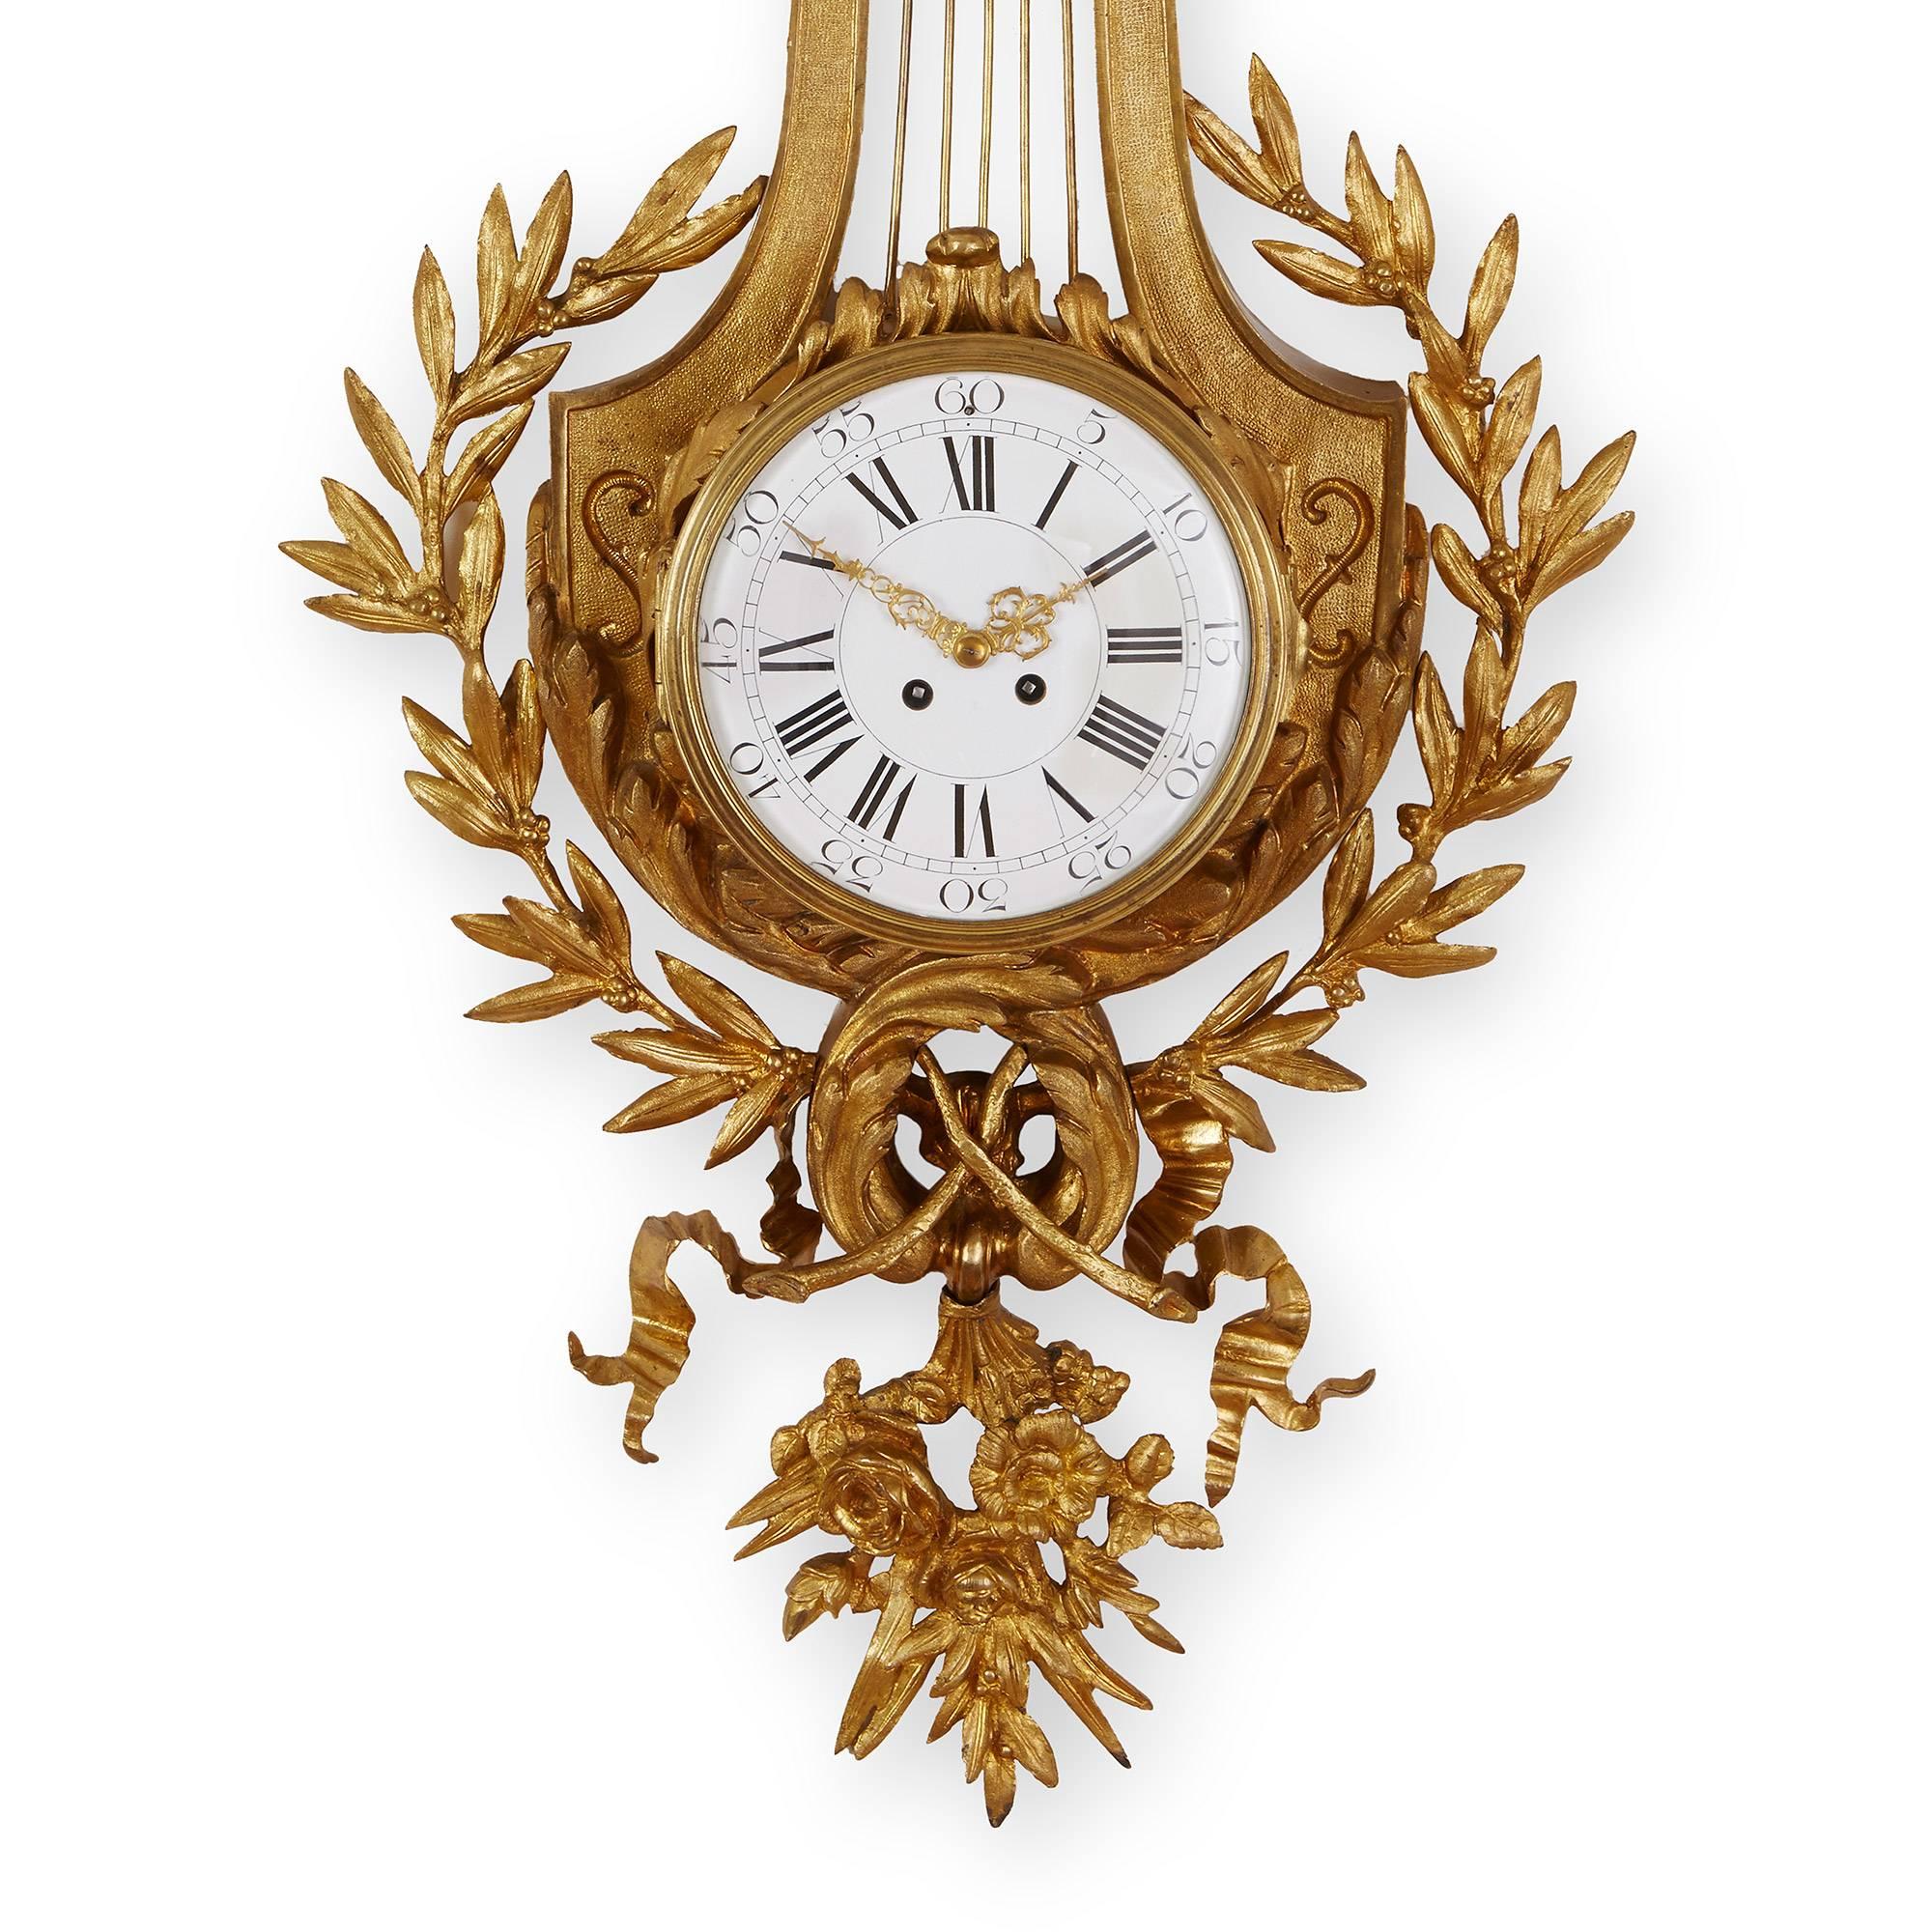 This elegant Cartel clock is decorated the refined neoclassical style. The wall clock features an unusual lyre shaped back plate and a double headed eagle surmount crowned by an ornate bow. The dial has both Roman and Arabic numerals and is